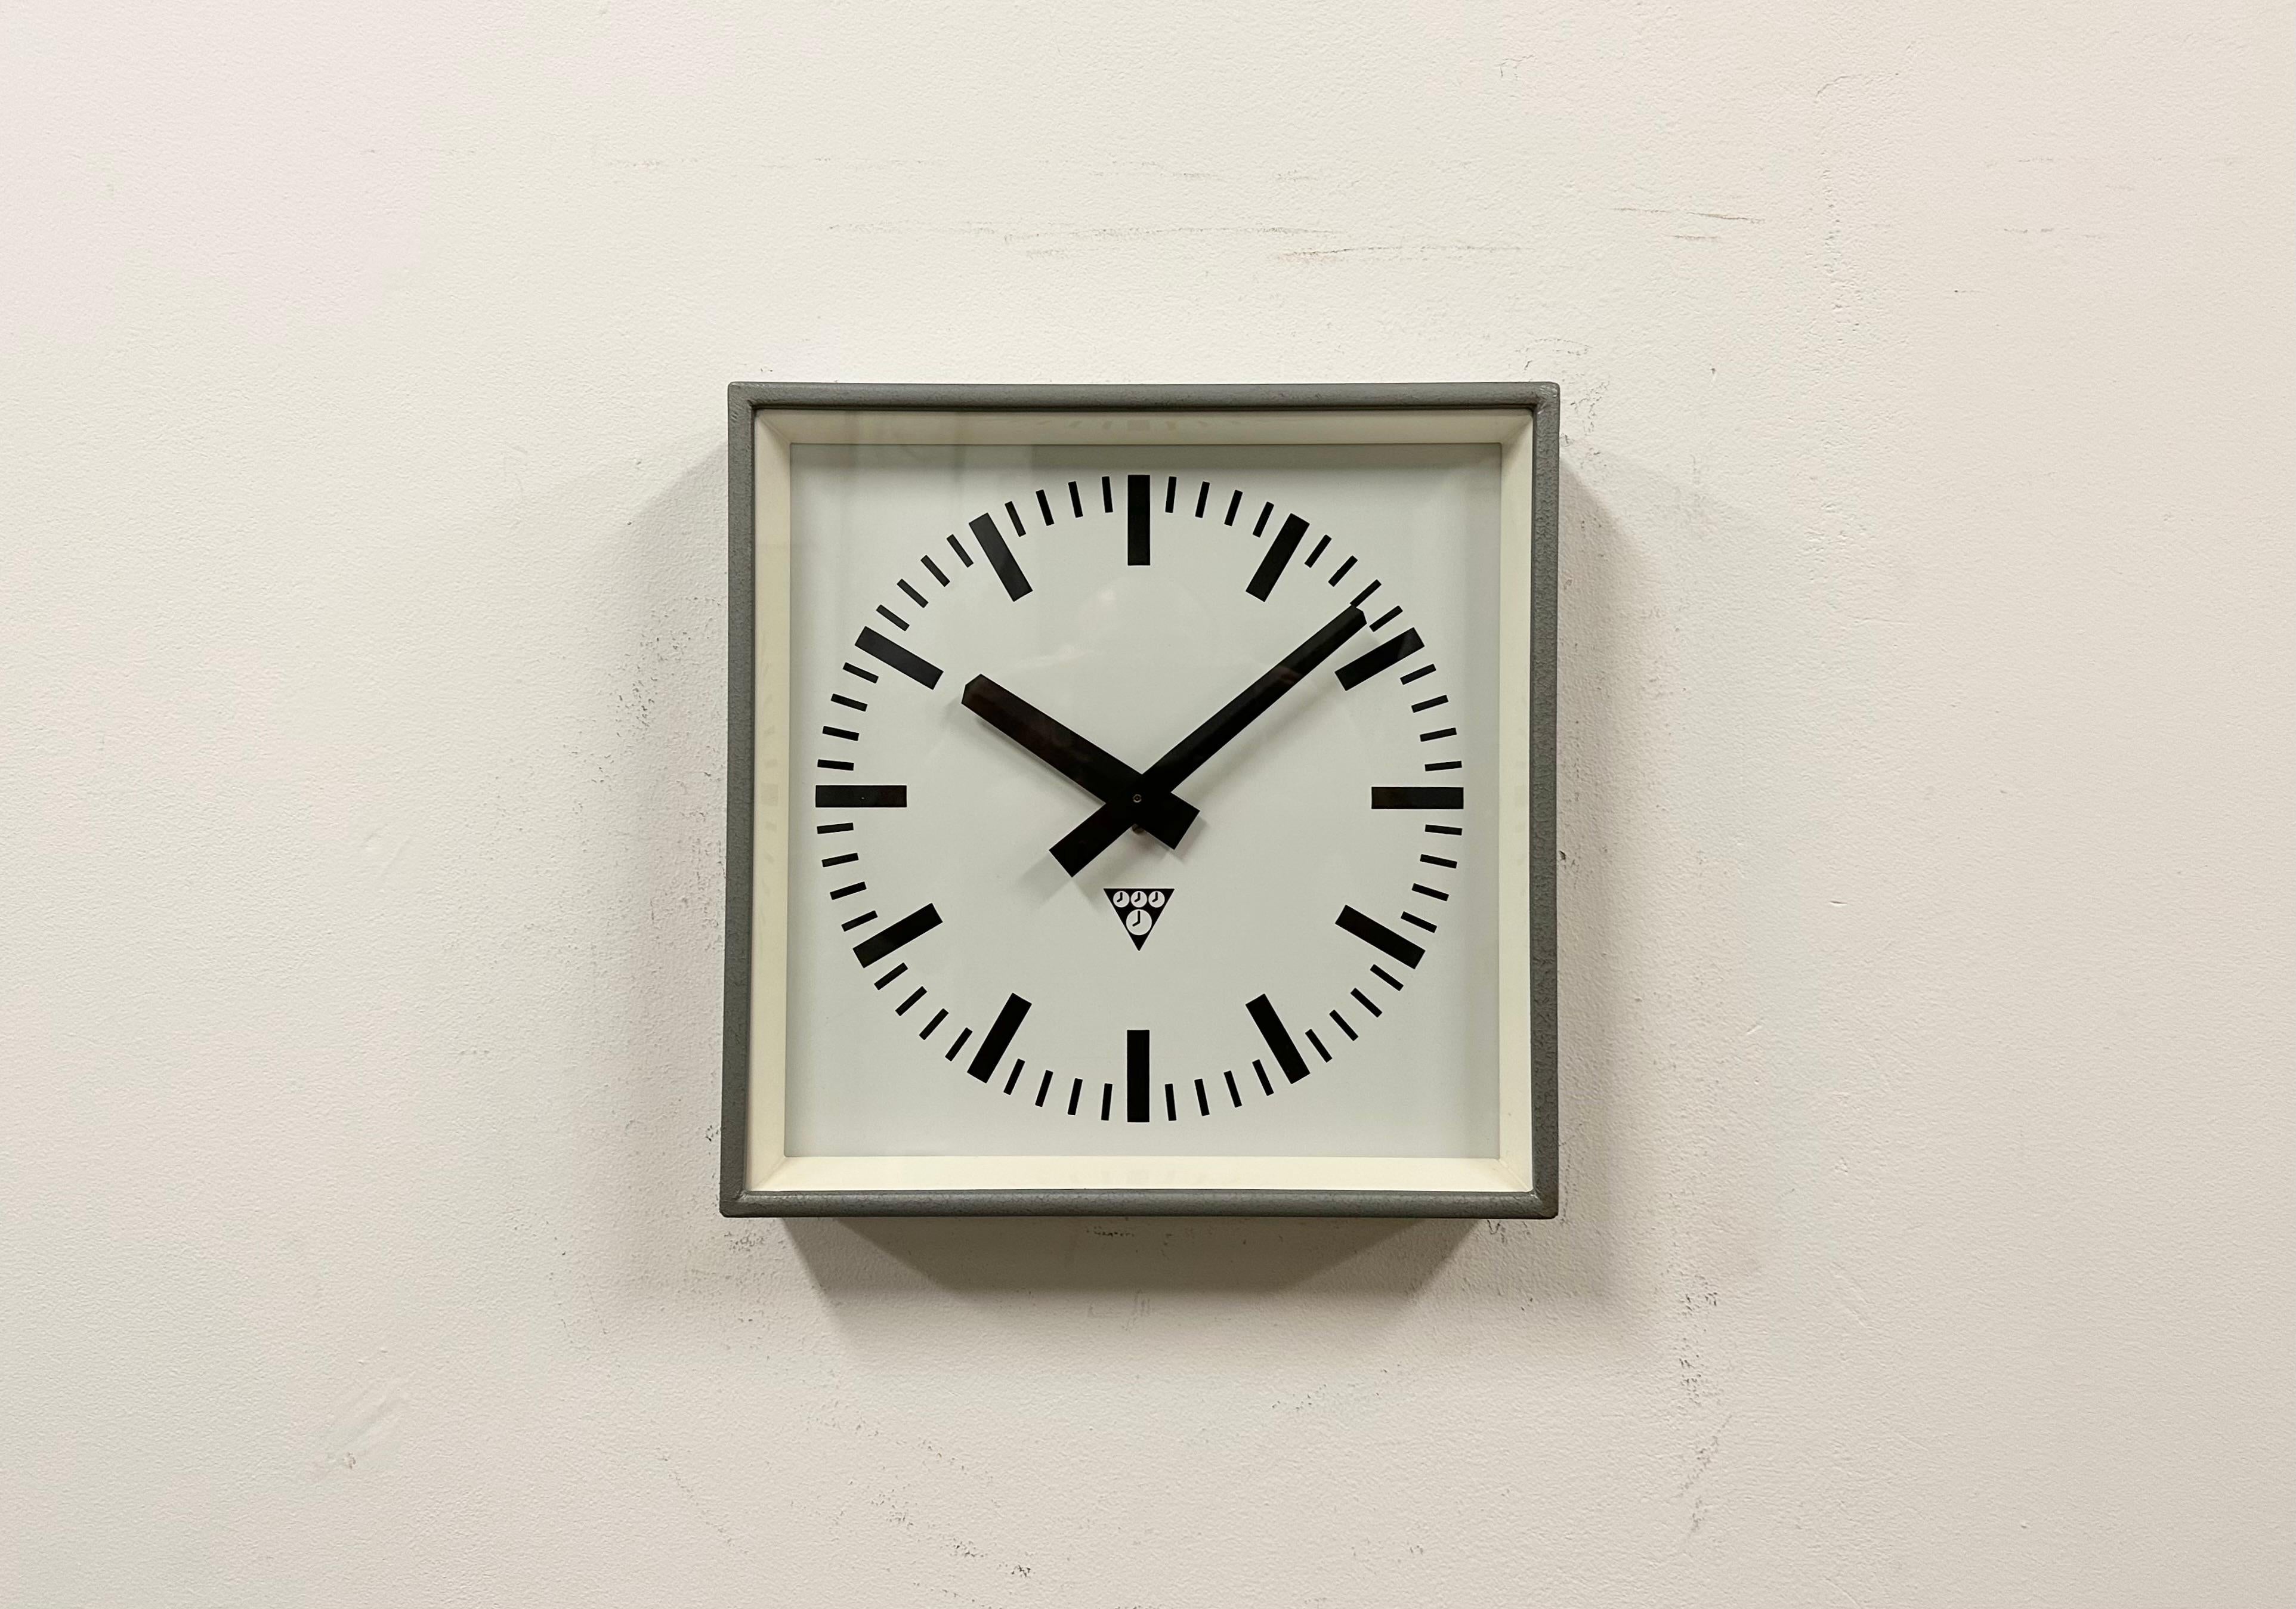 - Wall clock designed by Pragotron in former Czechoslovakia during the 1970s and made till 1990s
- Was used in factories, schools and railway stations 
- Grey hammerpaint metal frame 
- Aluminium dial and hands 
- Clear glass cover 
- Former